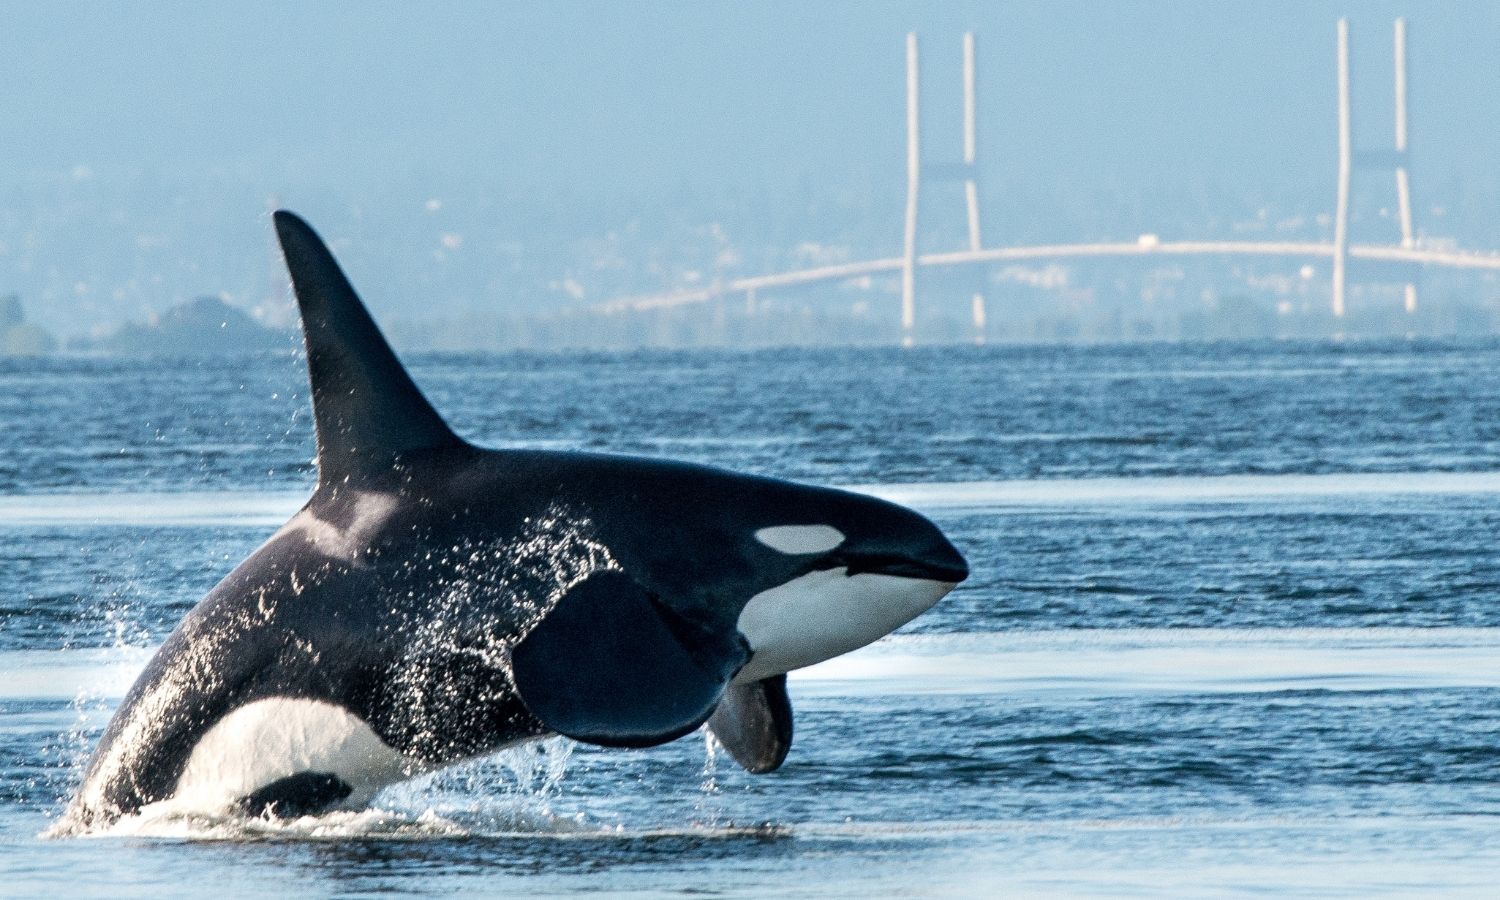 OTD in 2018: Science magazine announced that half the killer whale population will likely die due to the pollution from humans.